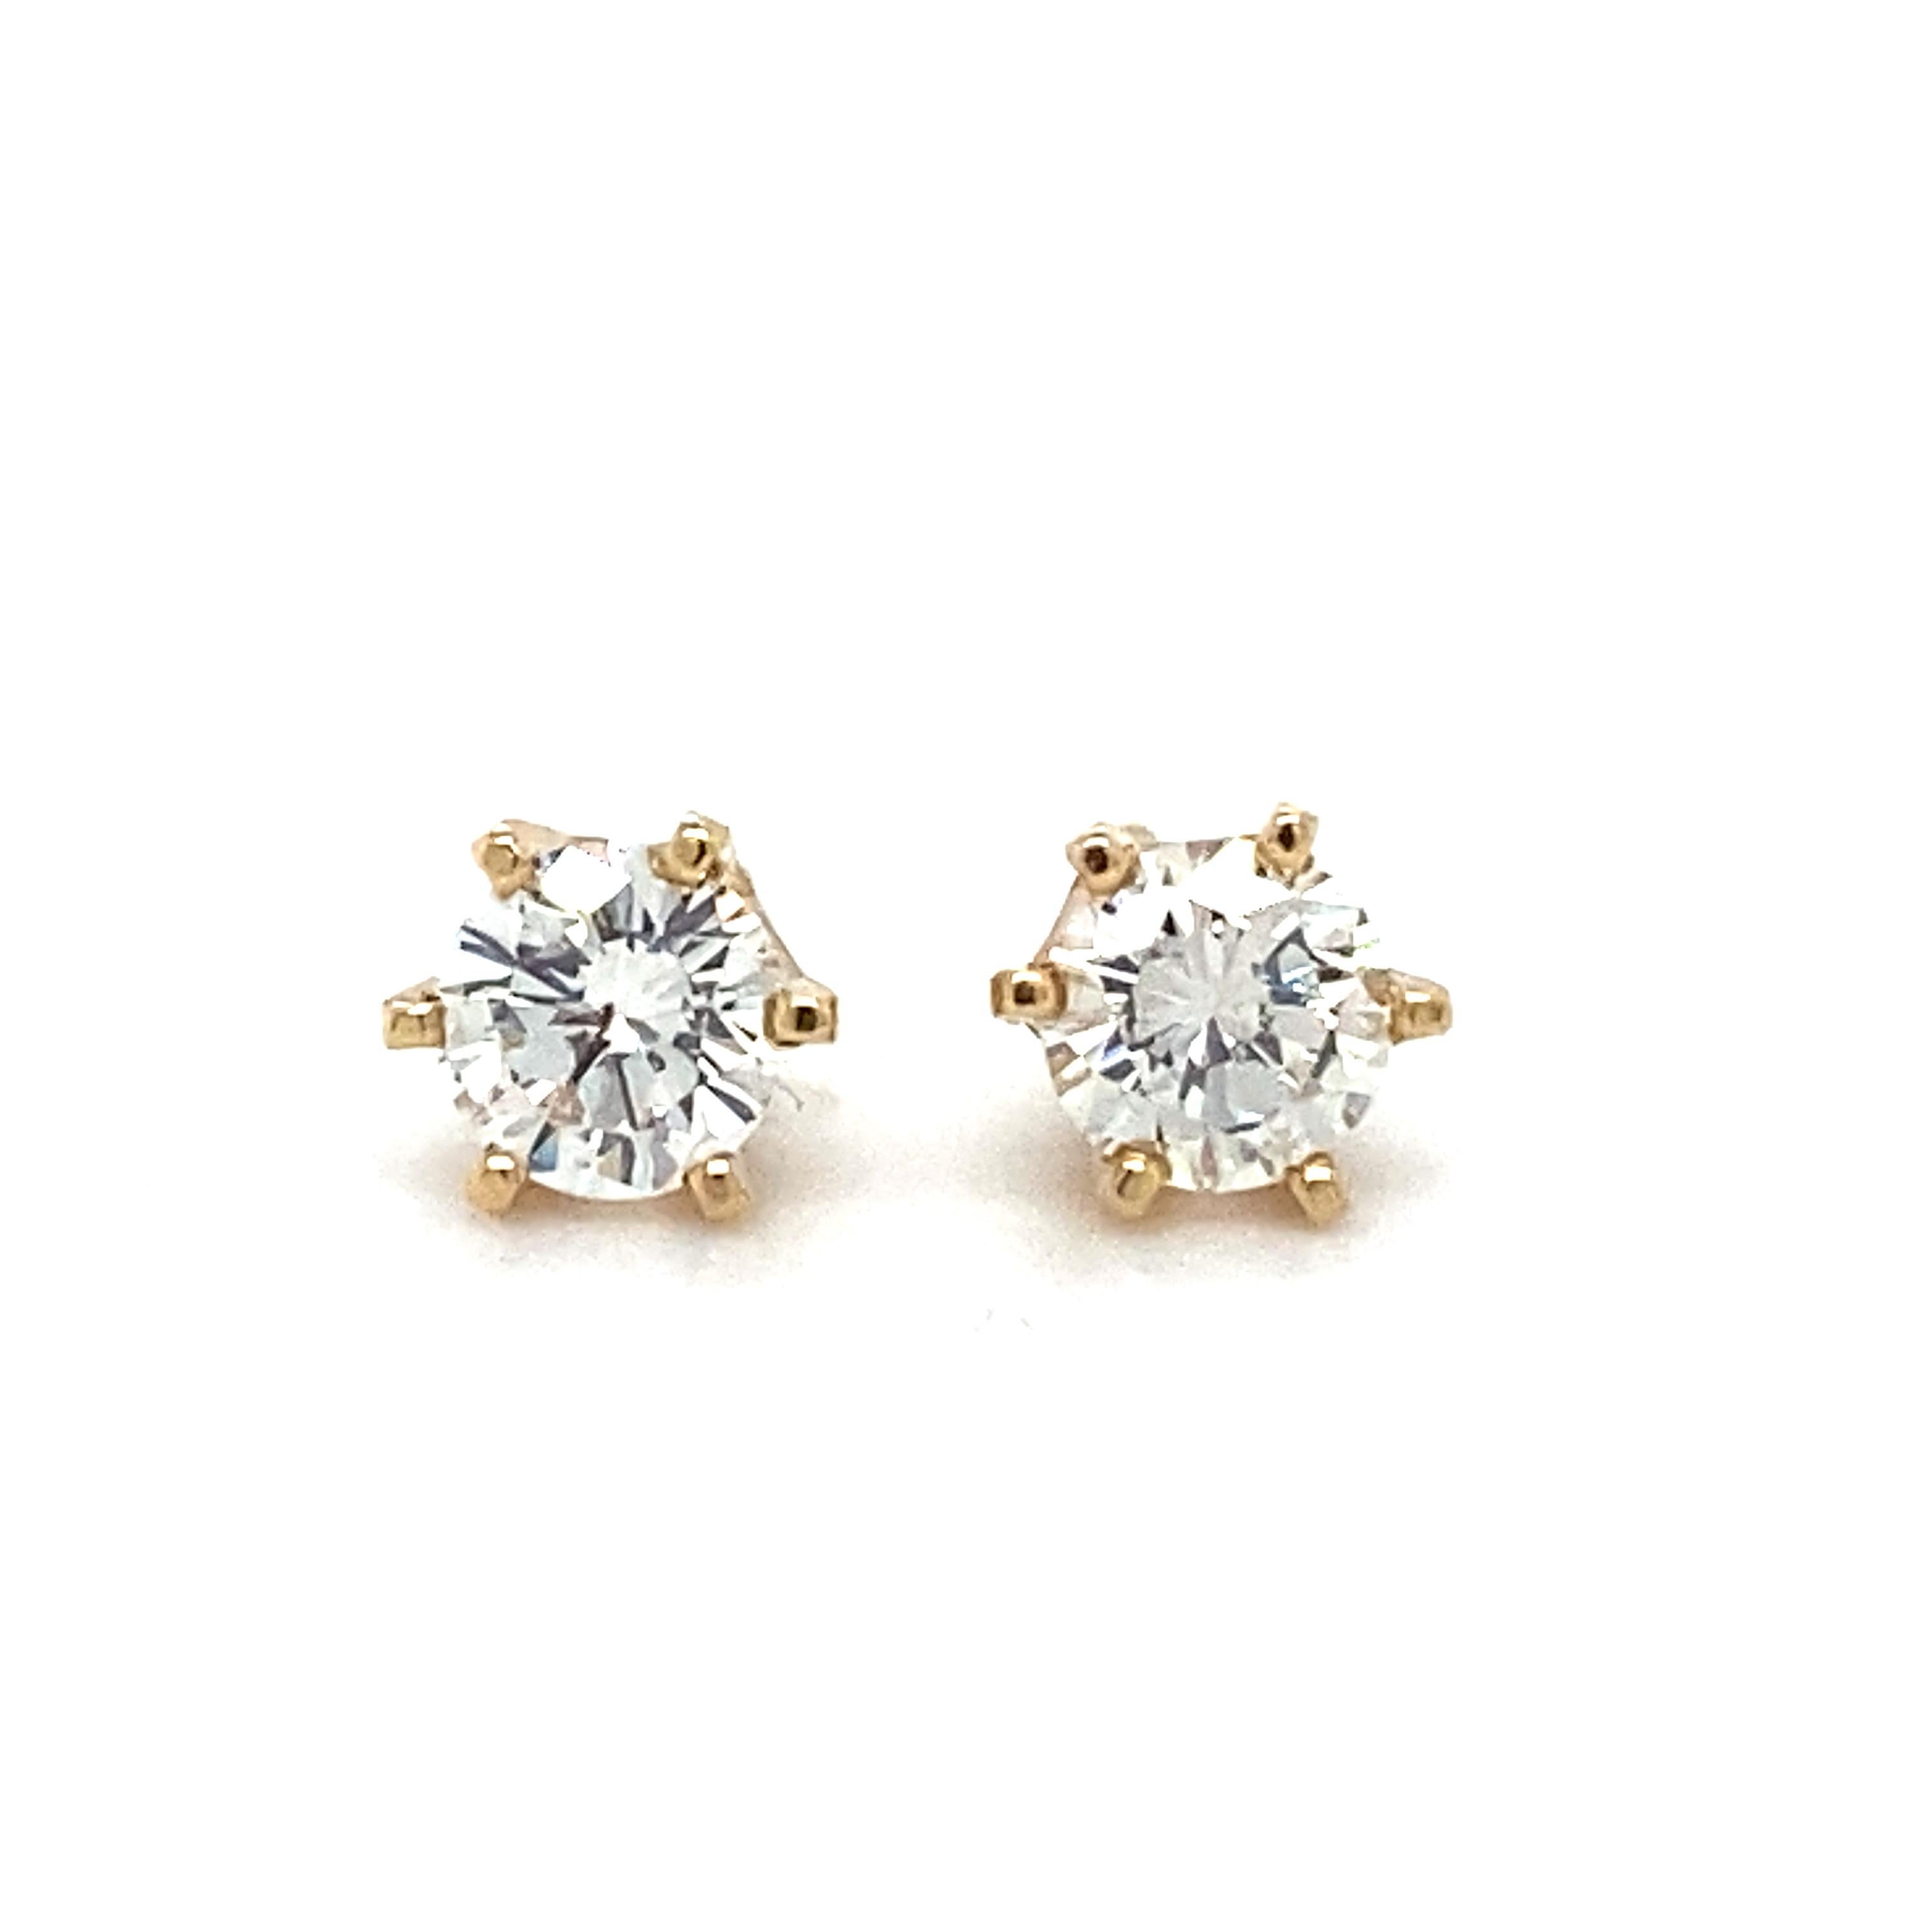 0.67 Carat Total Round Diamond Stud Earrings in 14 Karat Gold, circa 2000s In Excellent Condition For Sale In Atlanta, GA